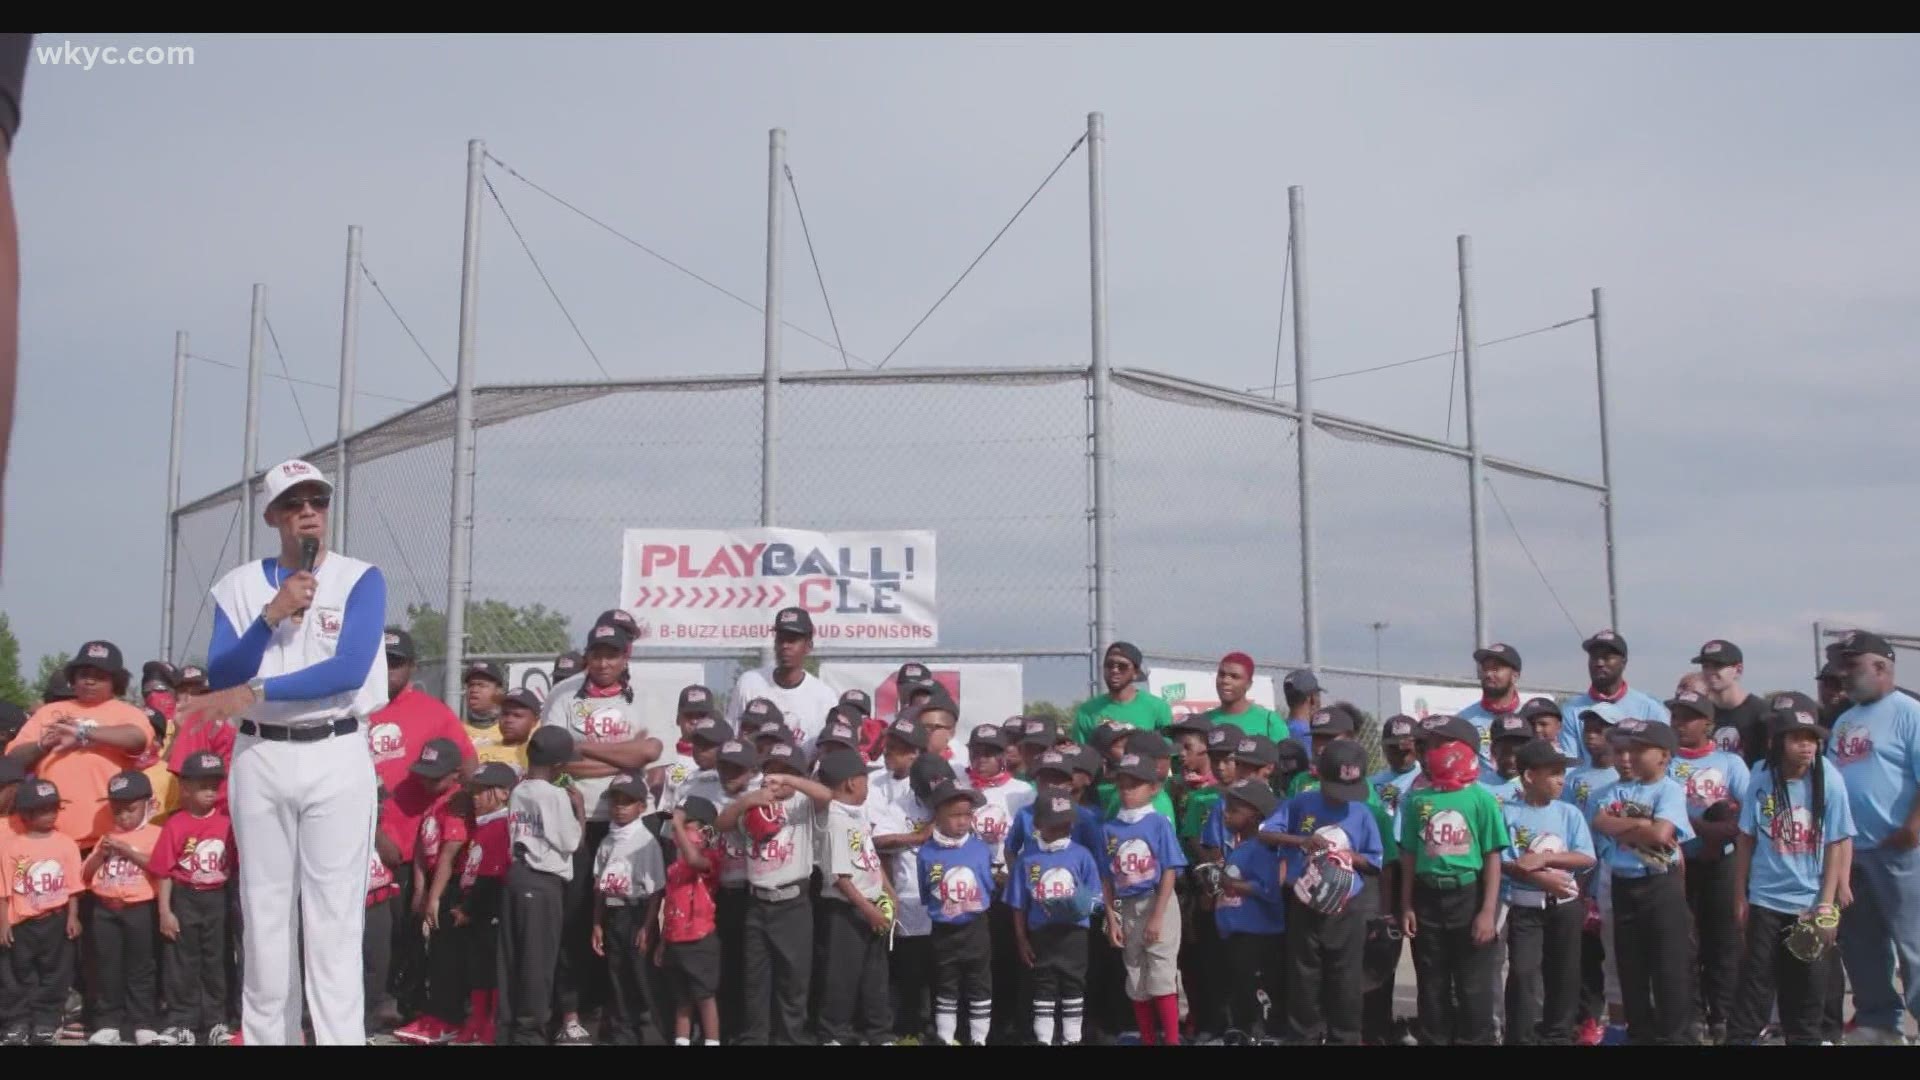 Despite declining numbers of Black professional baseball players, several organizations are trying to bring the sport back to Cleveland kids.